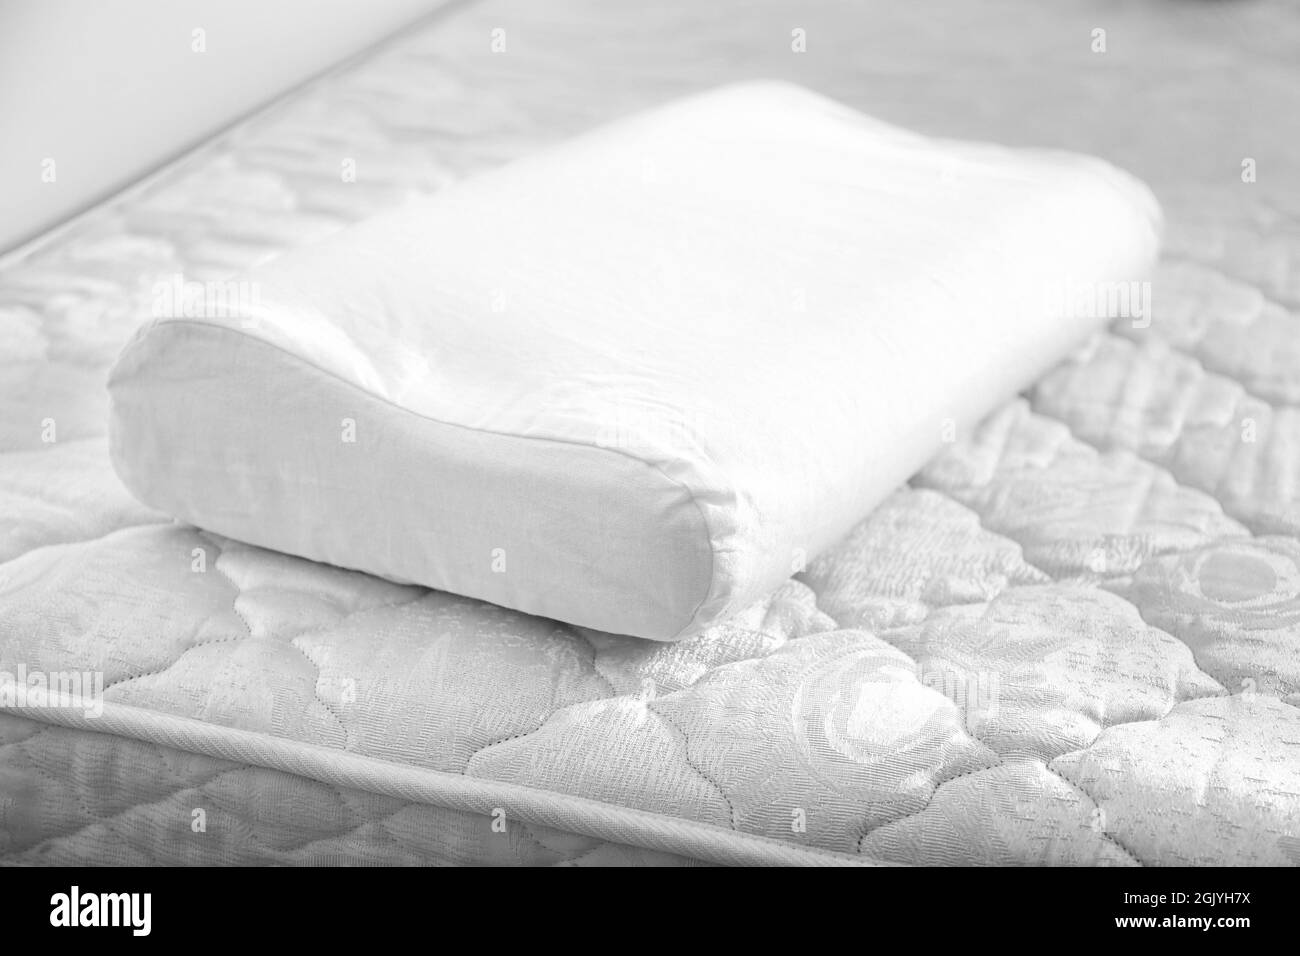 Orthopedic Pillow High Resolution Stock Photography and Images - Alamy